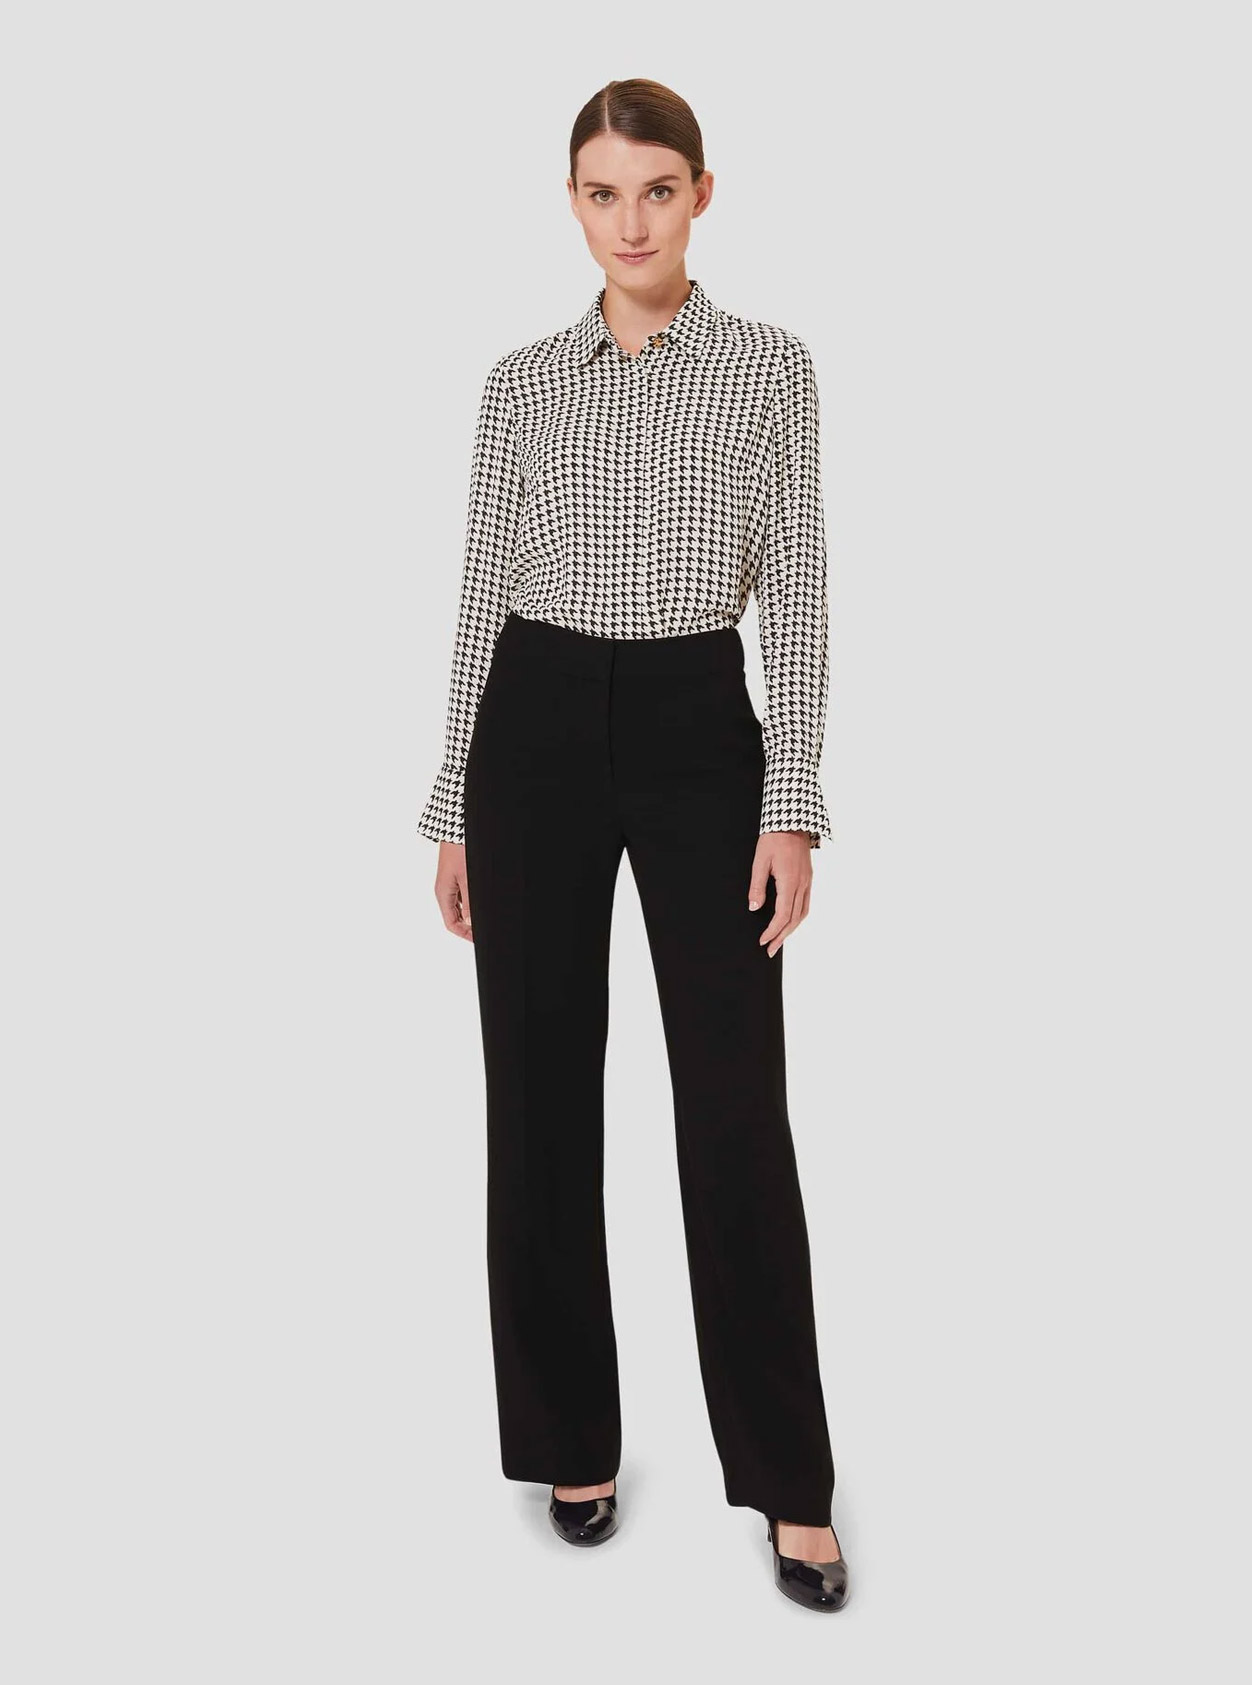  Long-sleeved work shirt with a dogtooth pattern paired with black wide leg trousers for women with black court shoes by Hobbs.